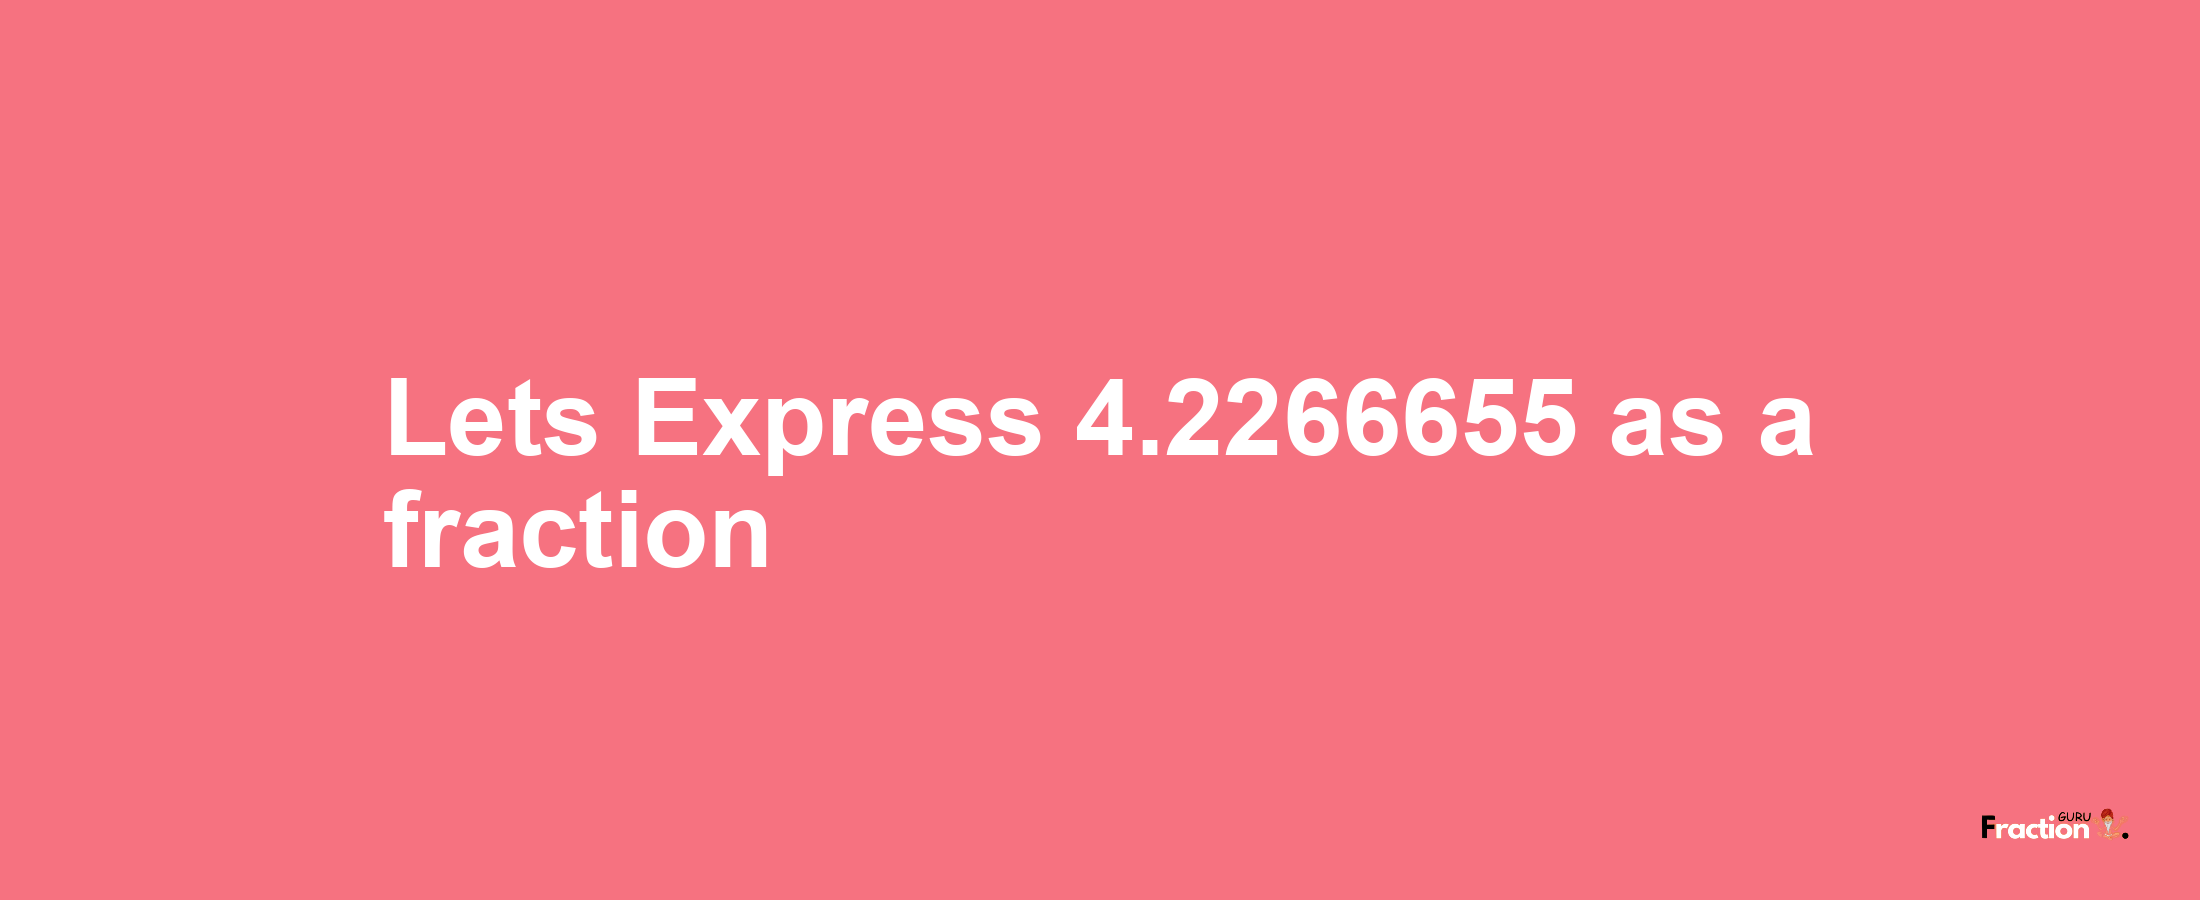 Lets Express 4.2266655 as afraction